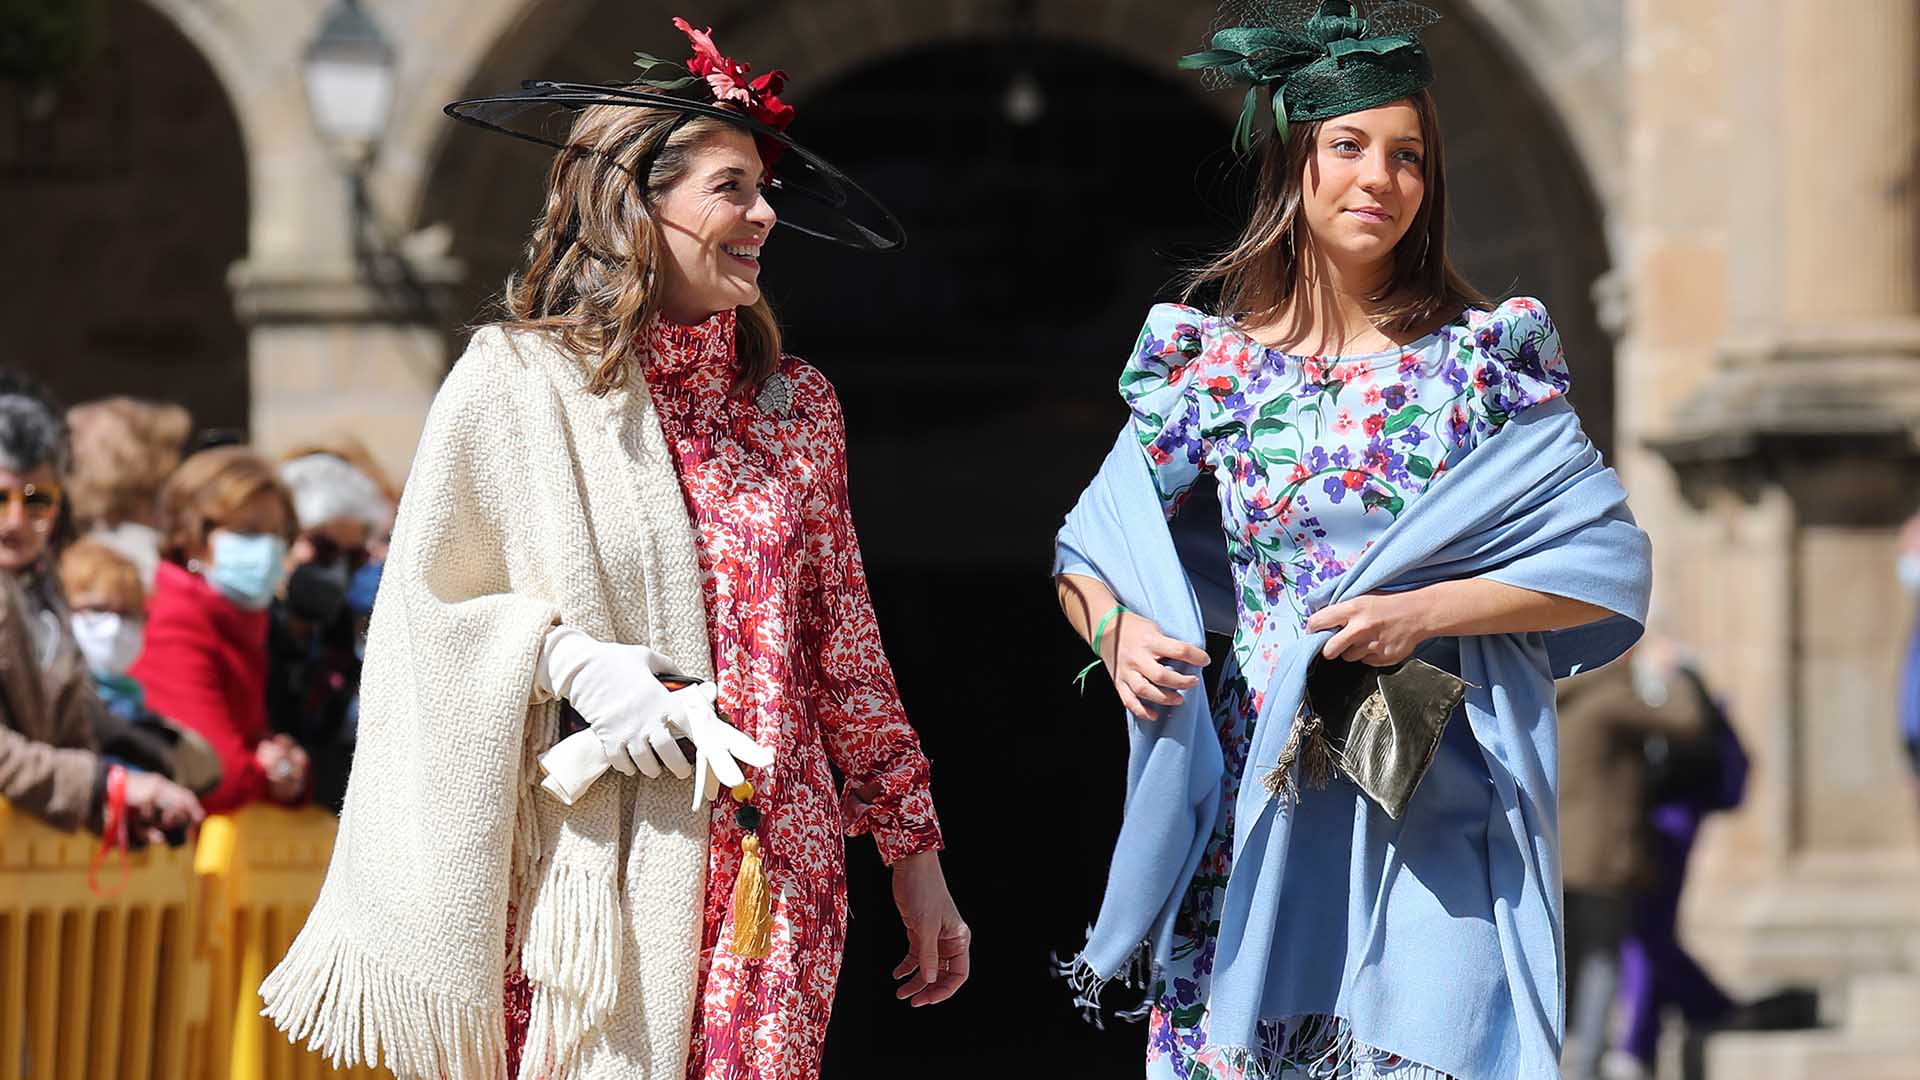 Xandra/Sandra Falco during the wedding of Isabelle Junot and Alvaro Falco in Plasencia (Caceres) on Saturday, 2 April 2022.